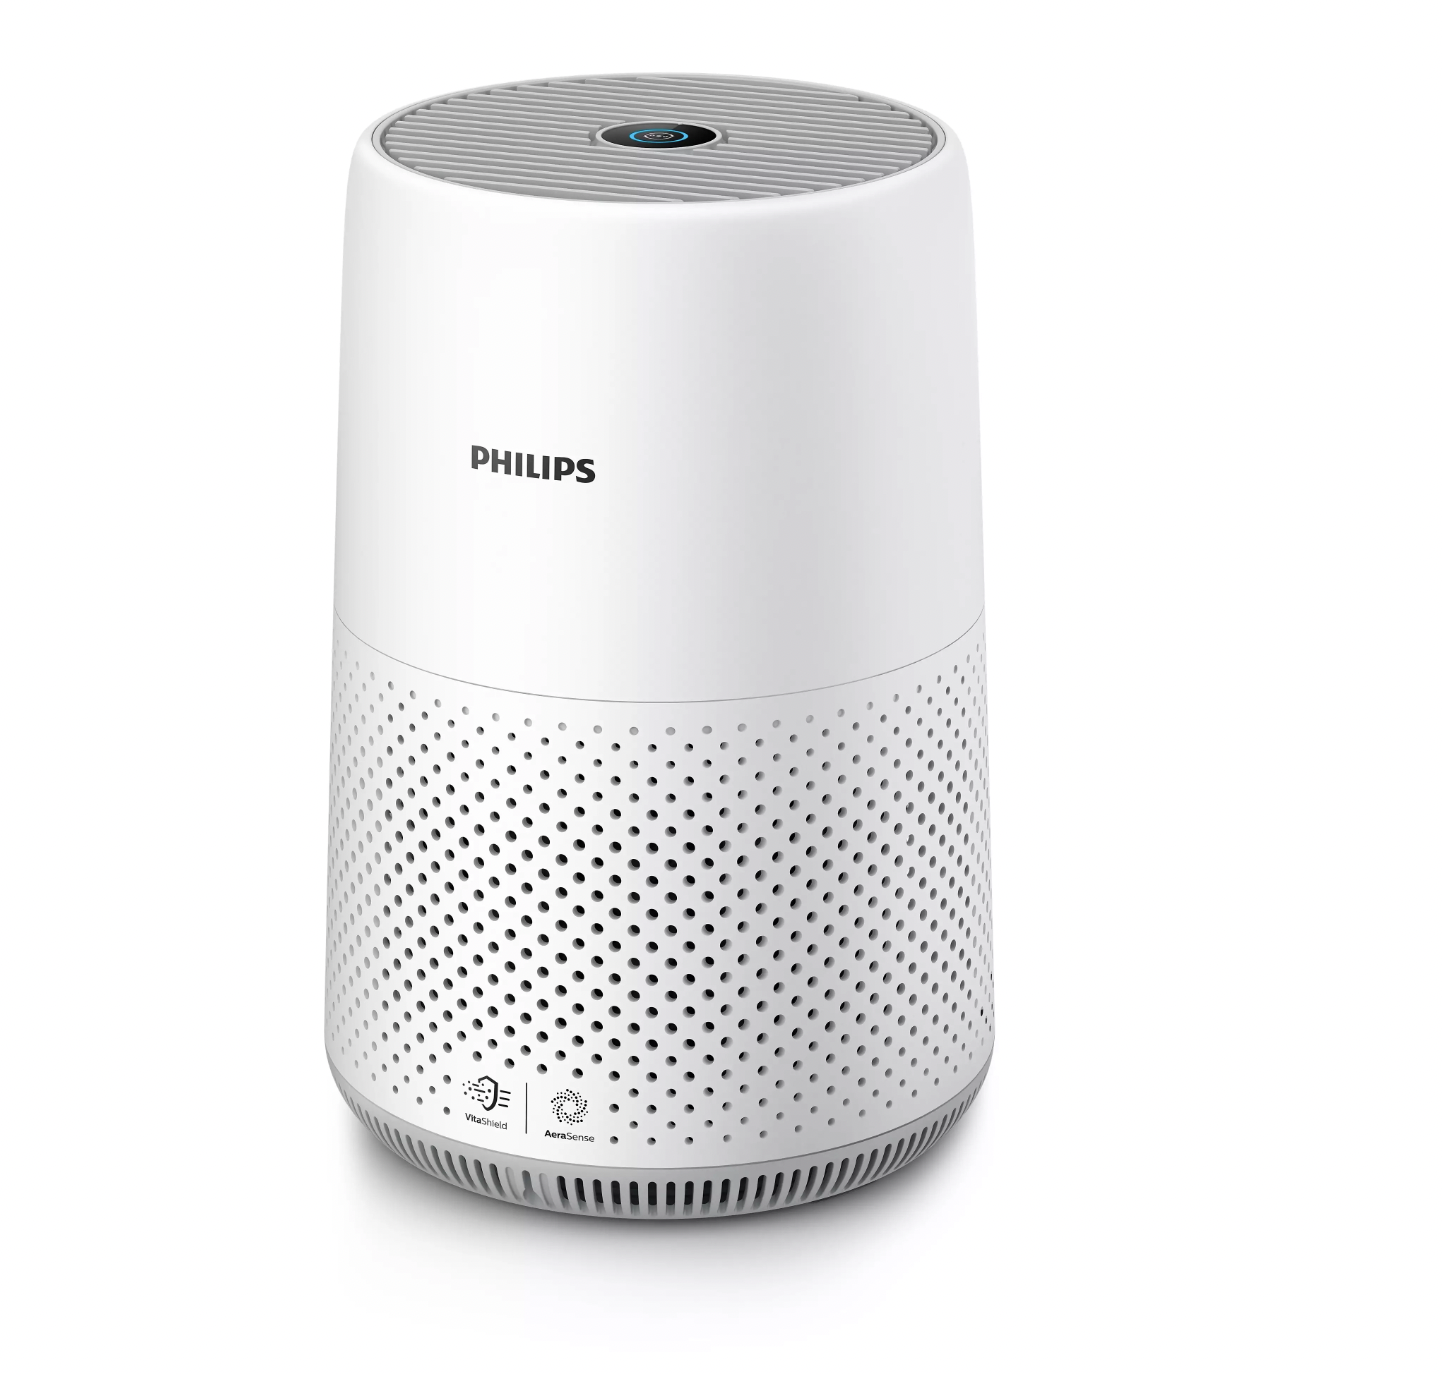 PHILIPS PDAC0819/10 humidificateur